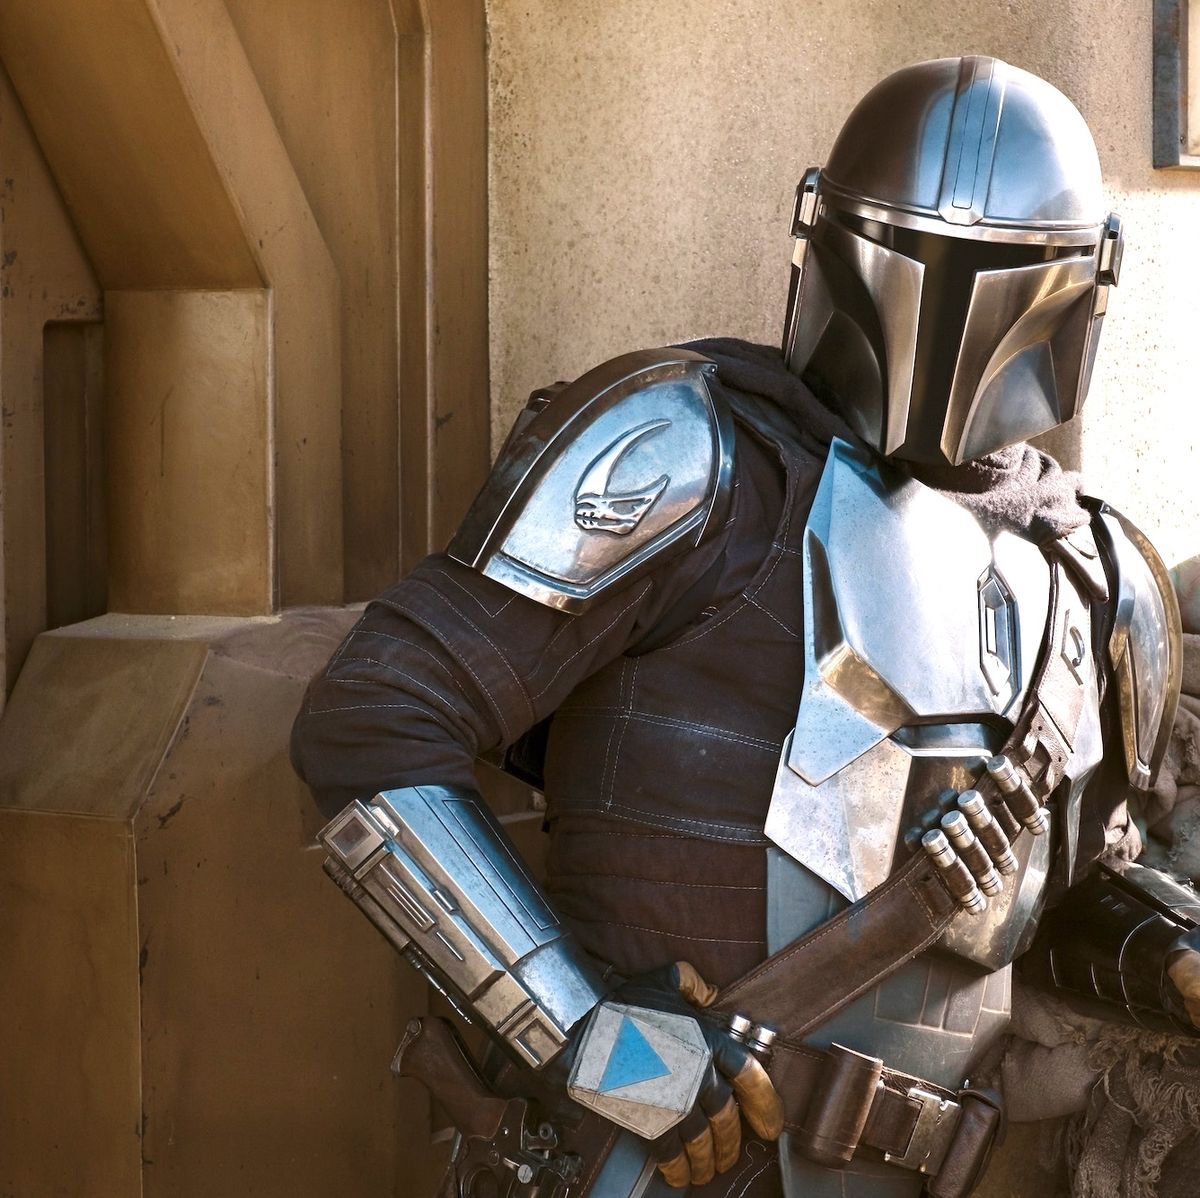 Updated With Release Date: 'The Mandalorian' Seasons 1 and 2 Will Be  Releasing on Blu-Ray - Star Wars News Net